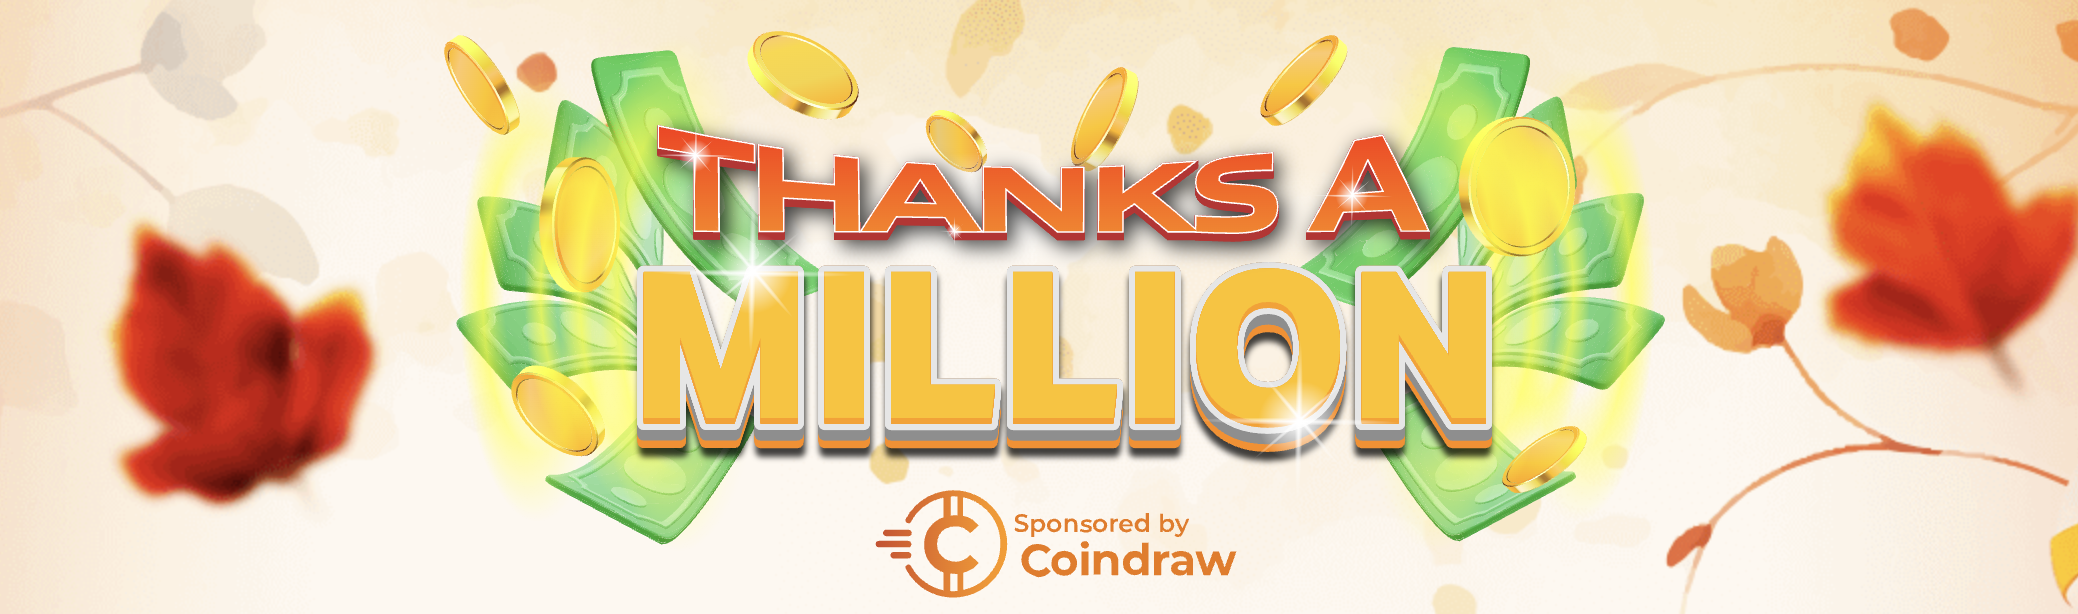 Thanks A Million by Coindraw Logo